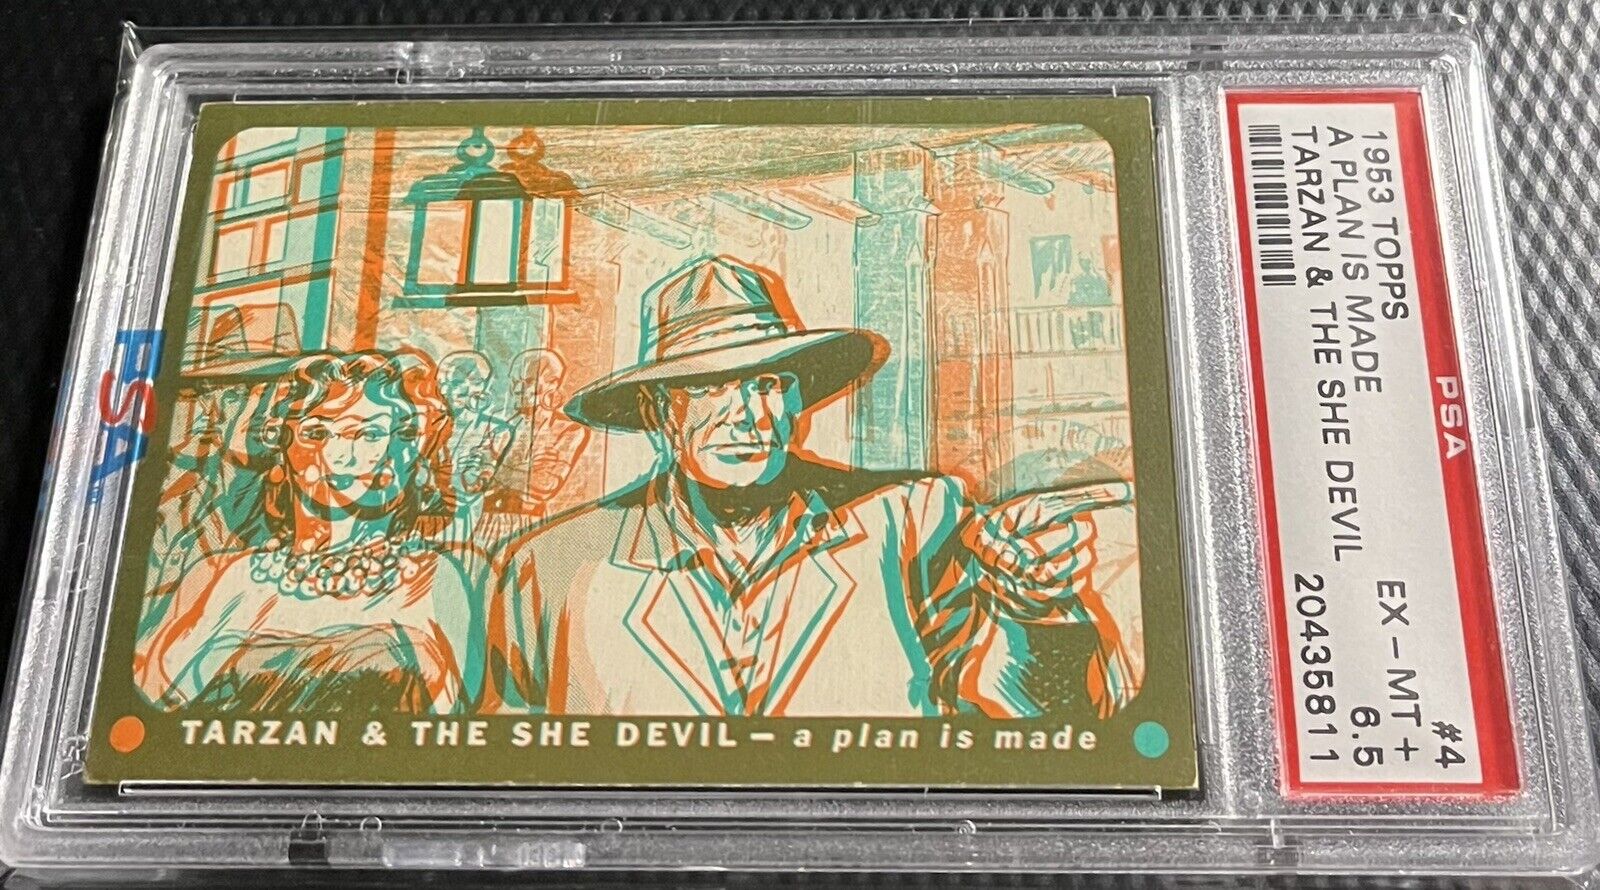 1953 Topps Tarzan & The She Devil PSA 6.5 Card #4 - A Plan is Made - Vintage